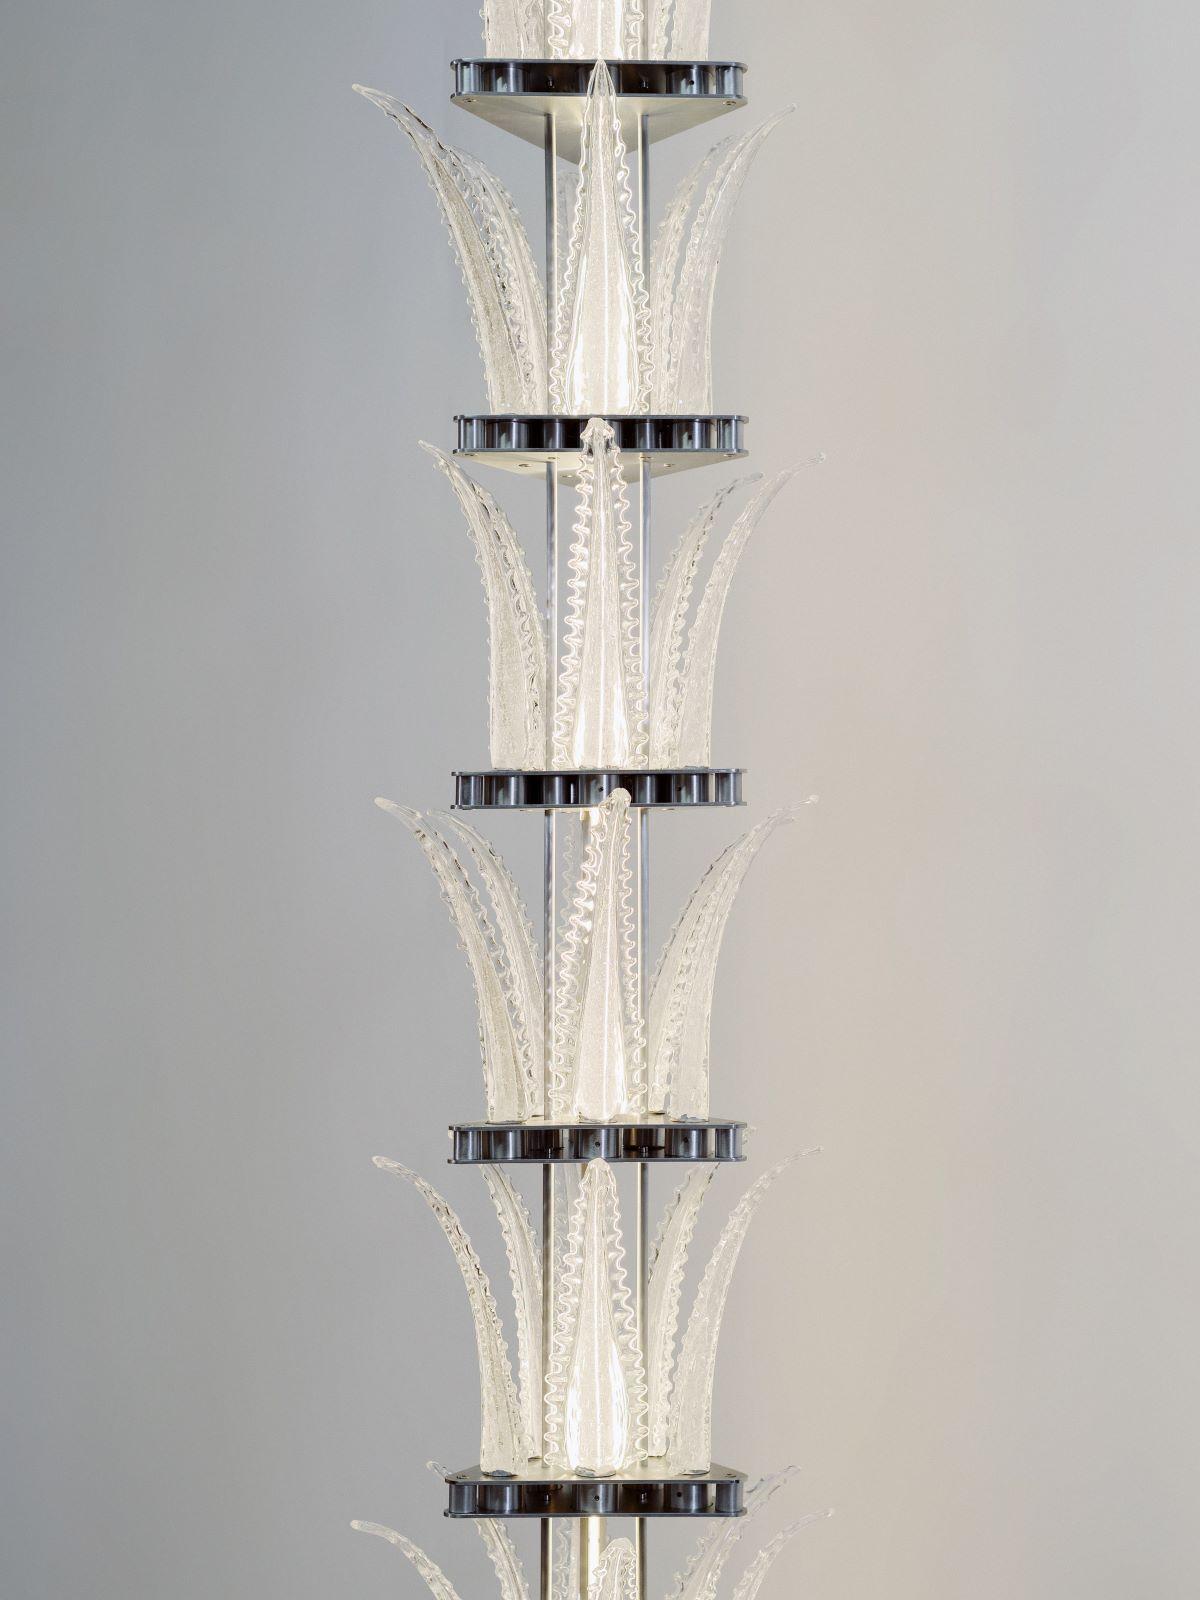 This stunning suspension tower is part of the Talar collection, a series realized in aluminum and Murano glass by Wave Murano Glass and the design duo Scattered Disc Objects (SDOBJS). The overall structure is inspired by the slender architecture of